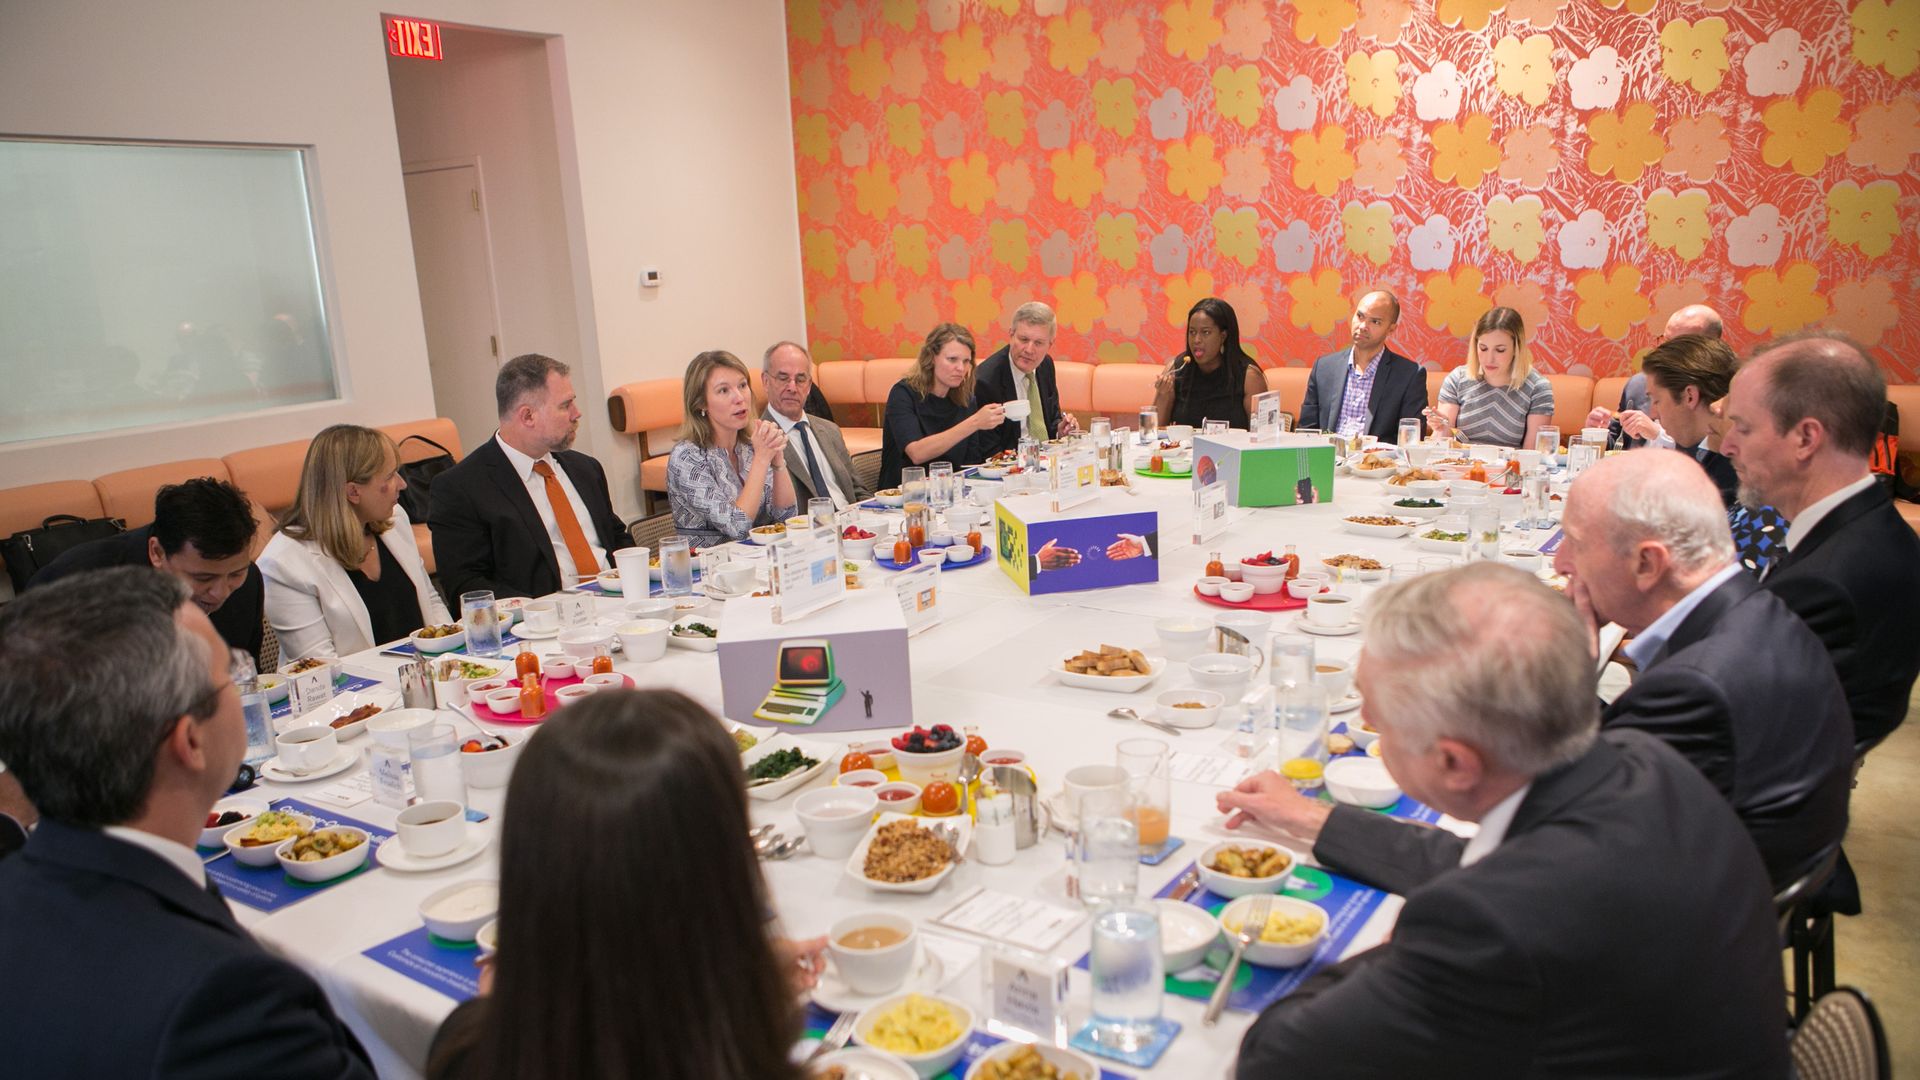 A large table with Kim Hart and 25 experts gathered for a conversation over breakfast   